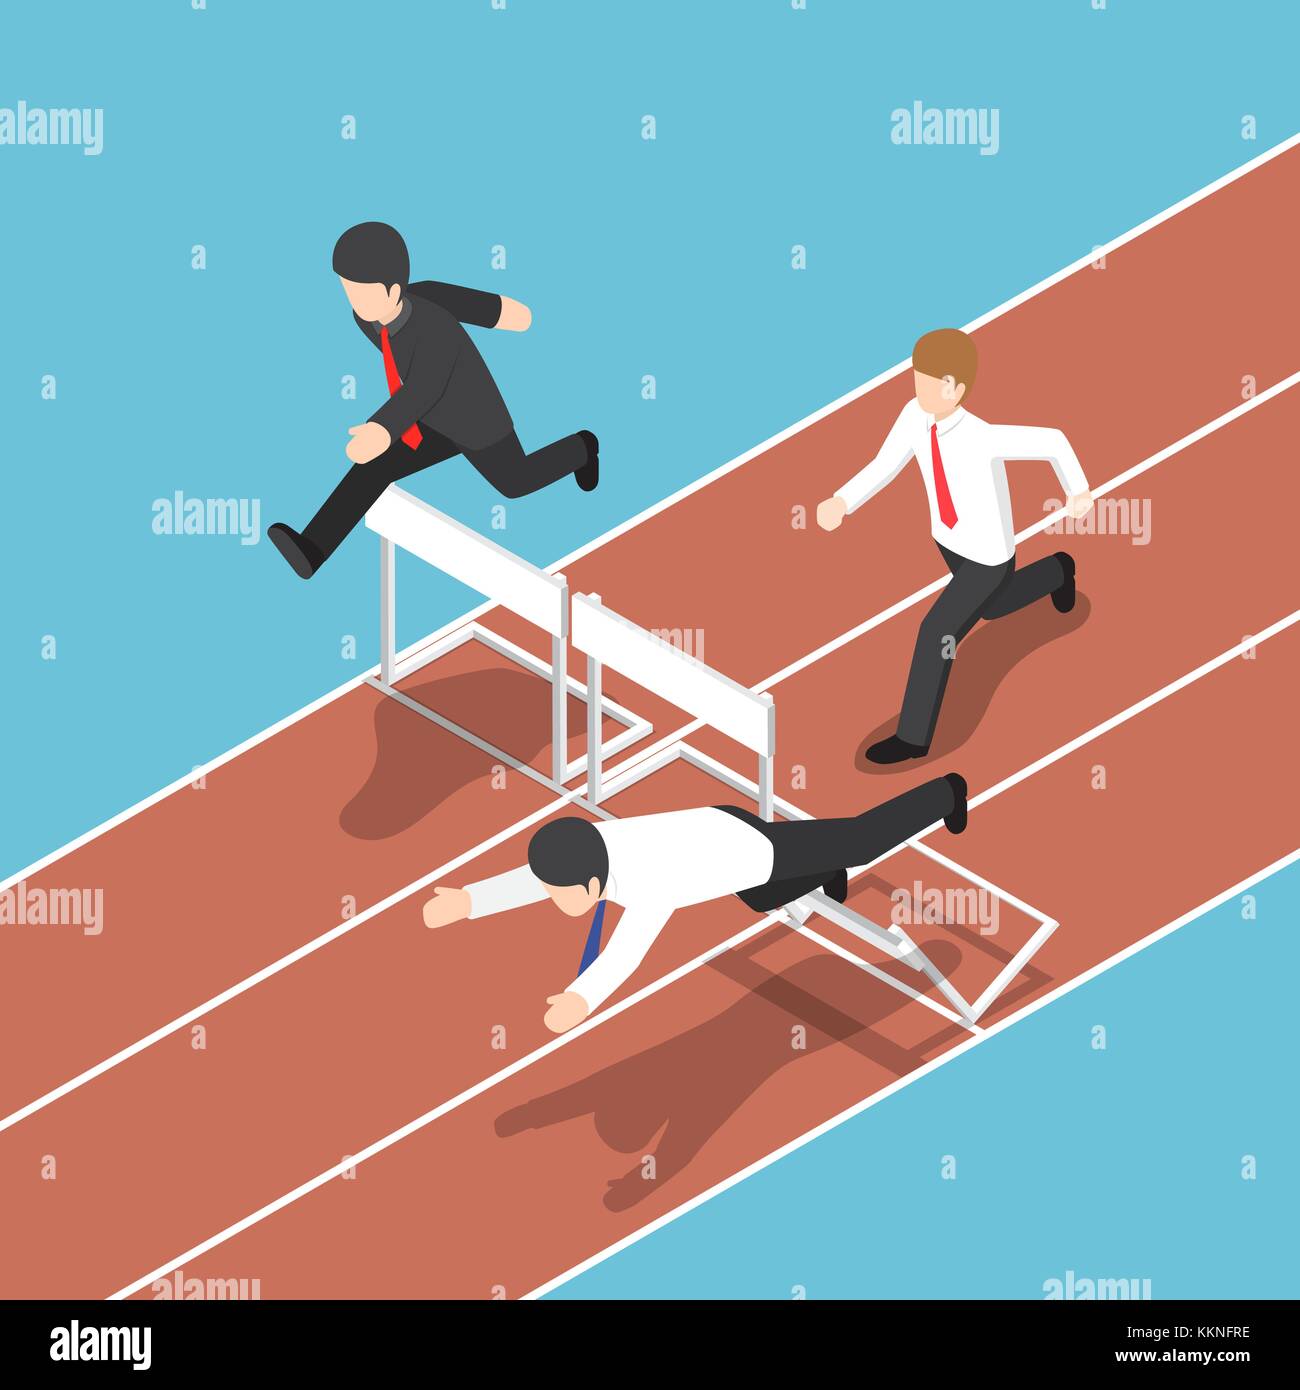 Flat 3d isometric businessman running with obstacle in hurdle race. Business competition concept. Stock Vector